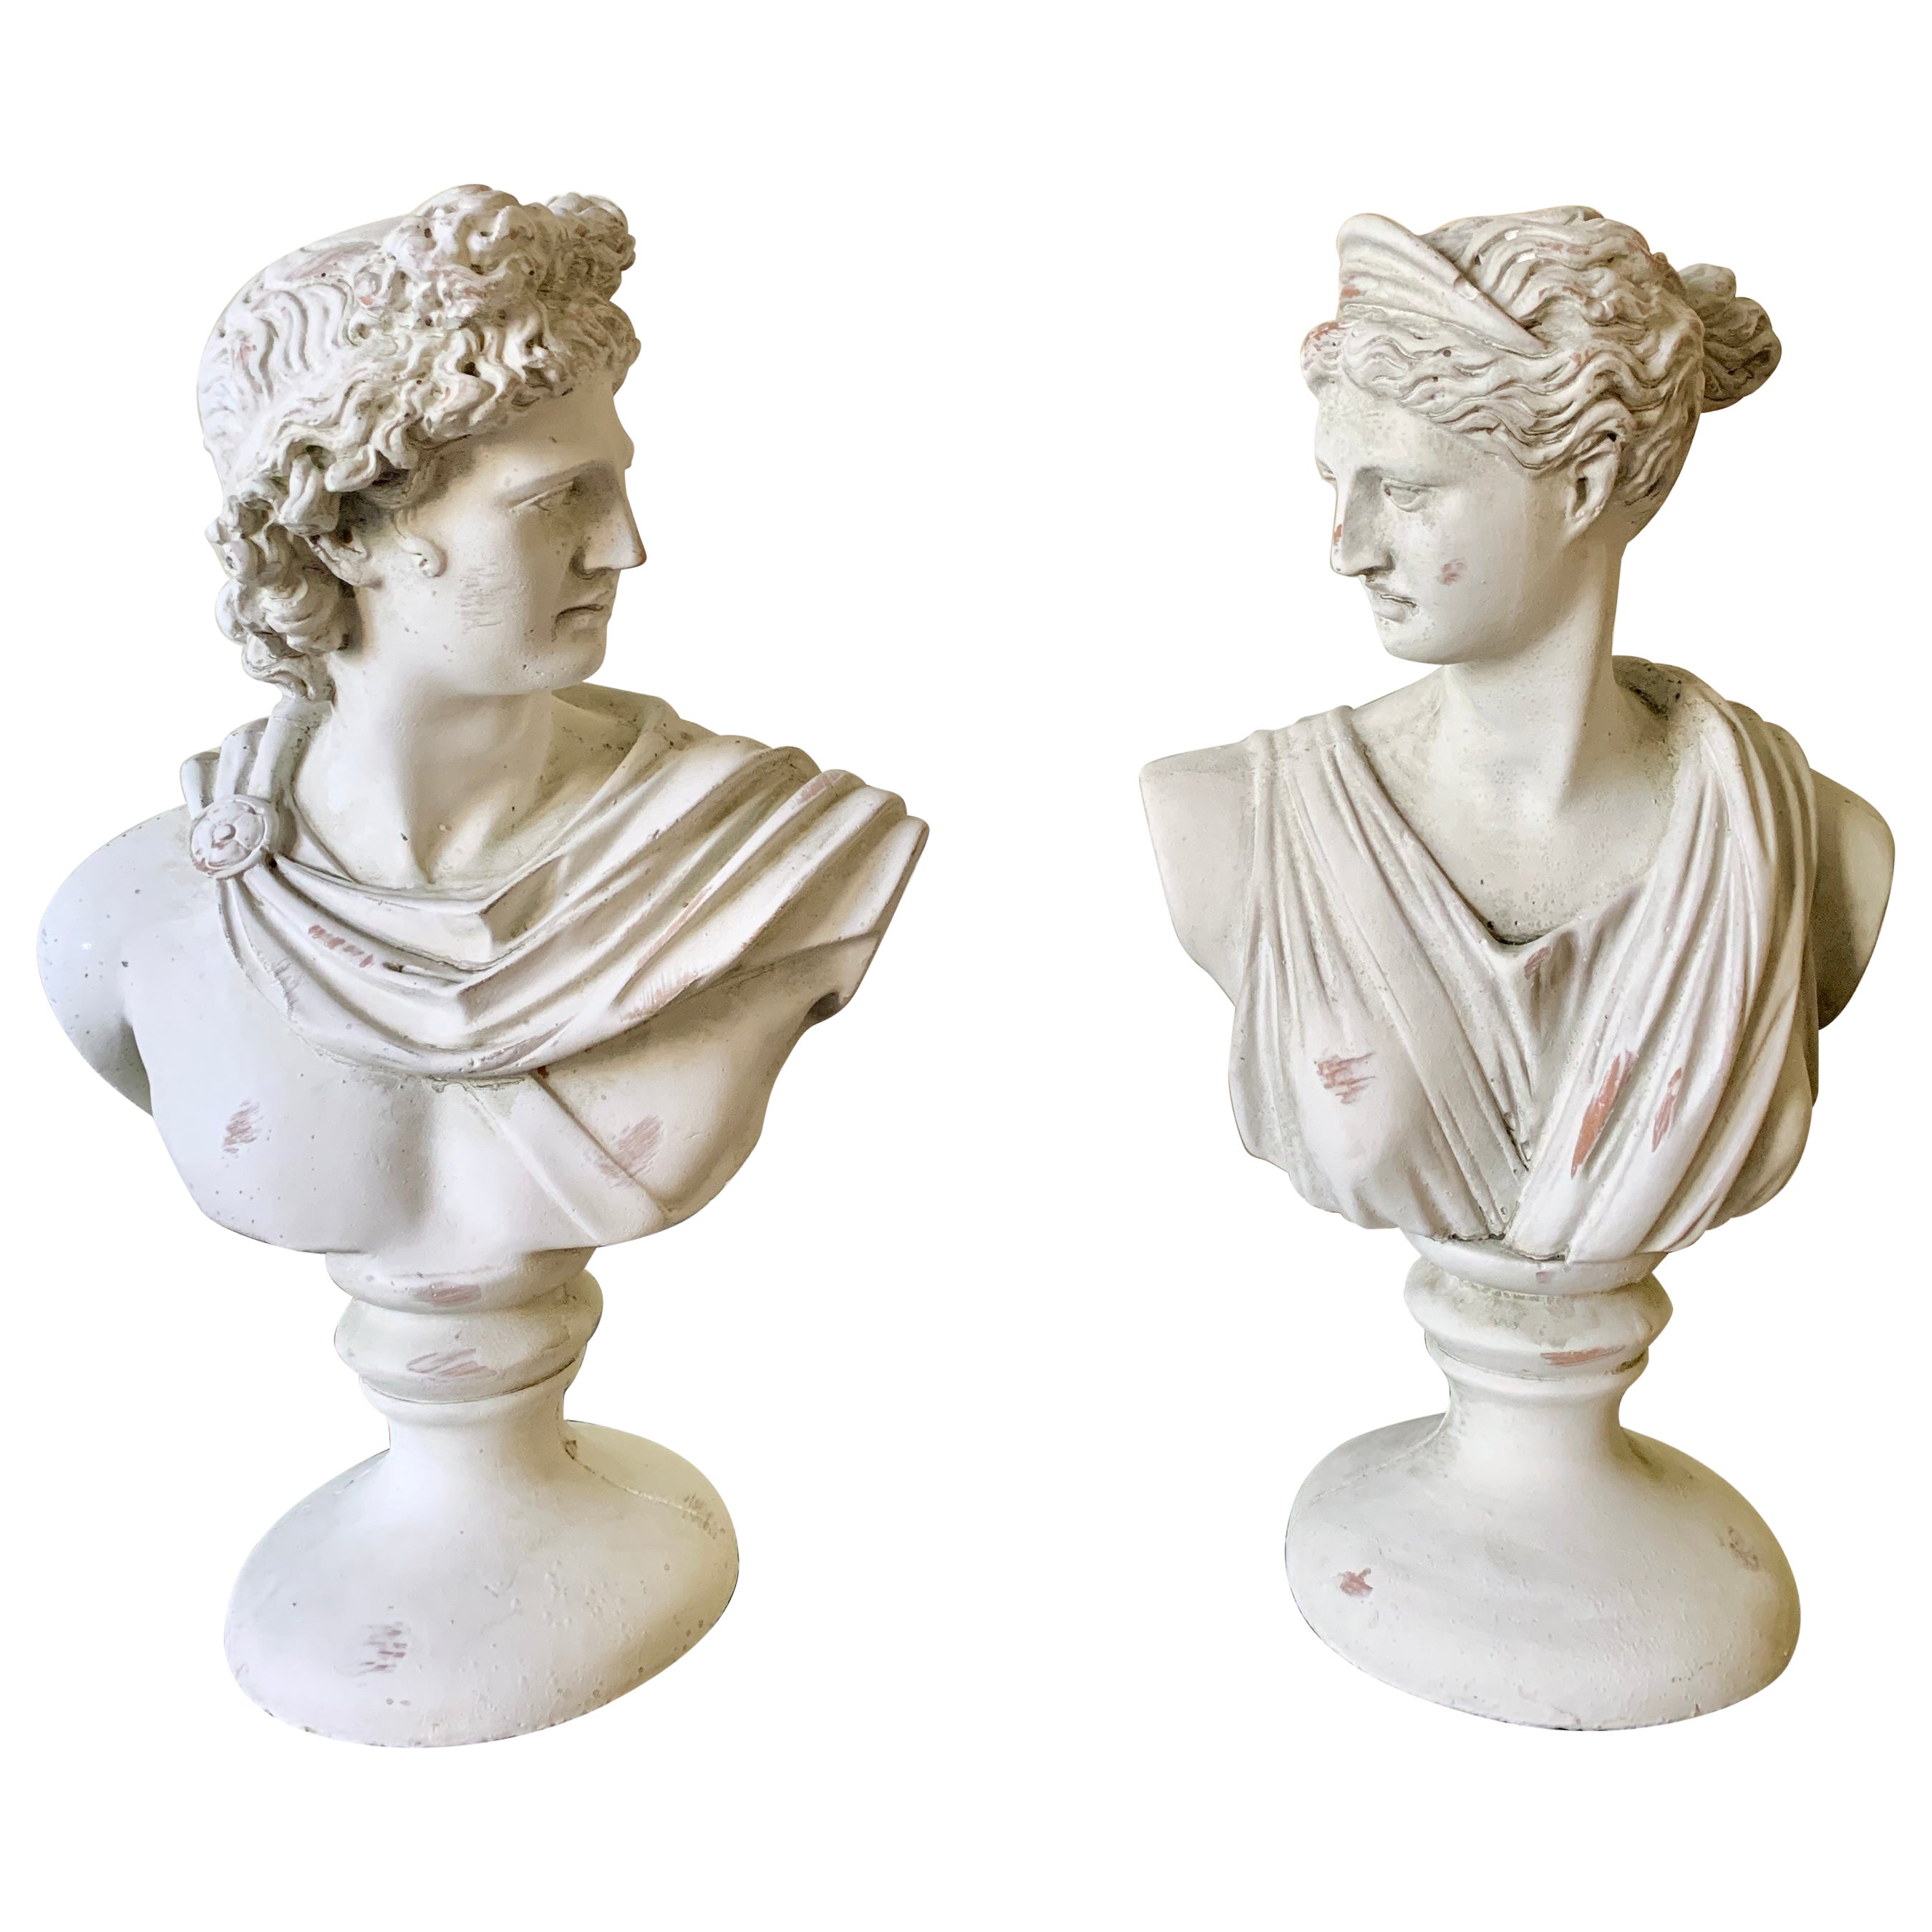 Neoclassical Plaster Busts of Diana and Apollo Belvedere Sculptures, Pair For Sale